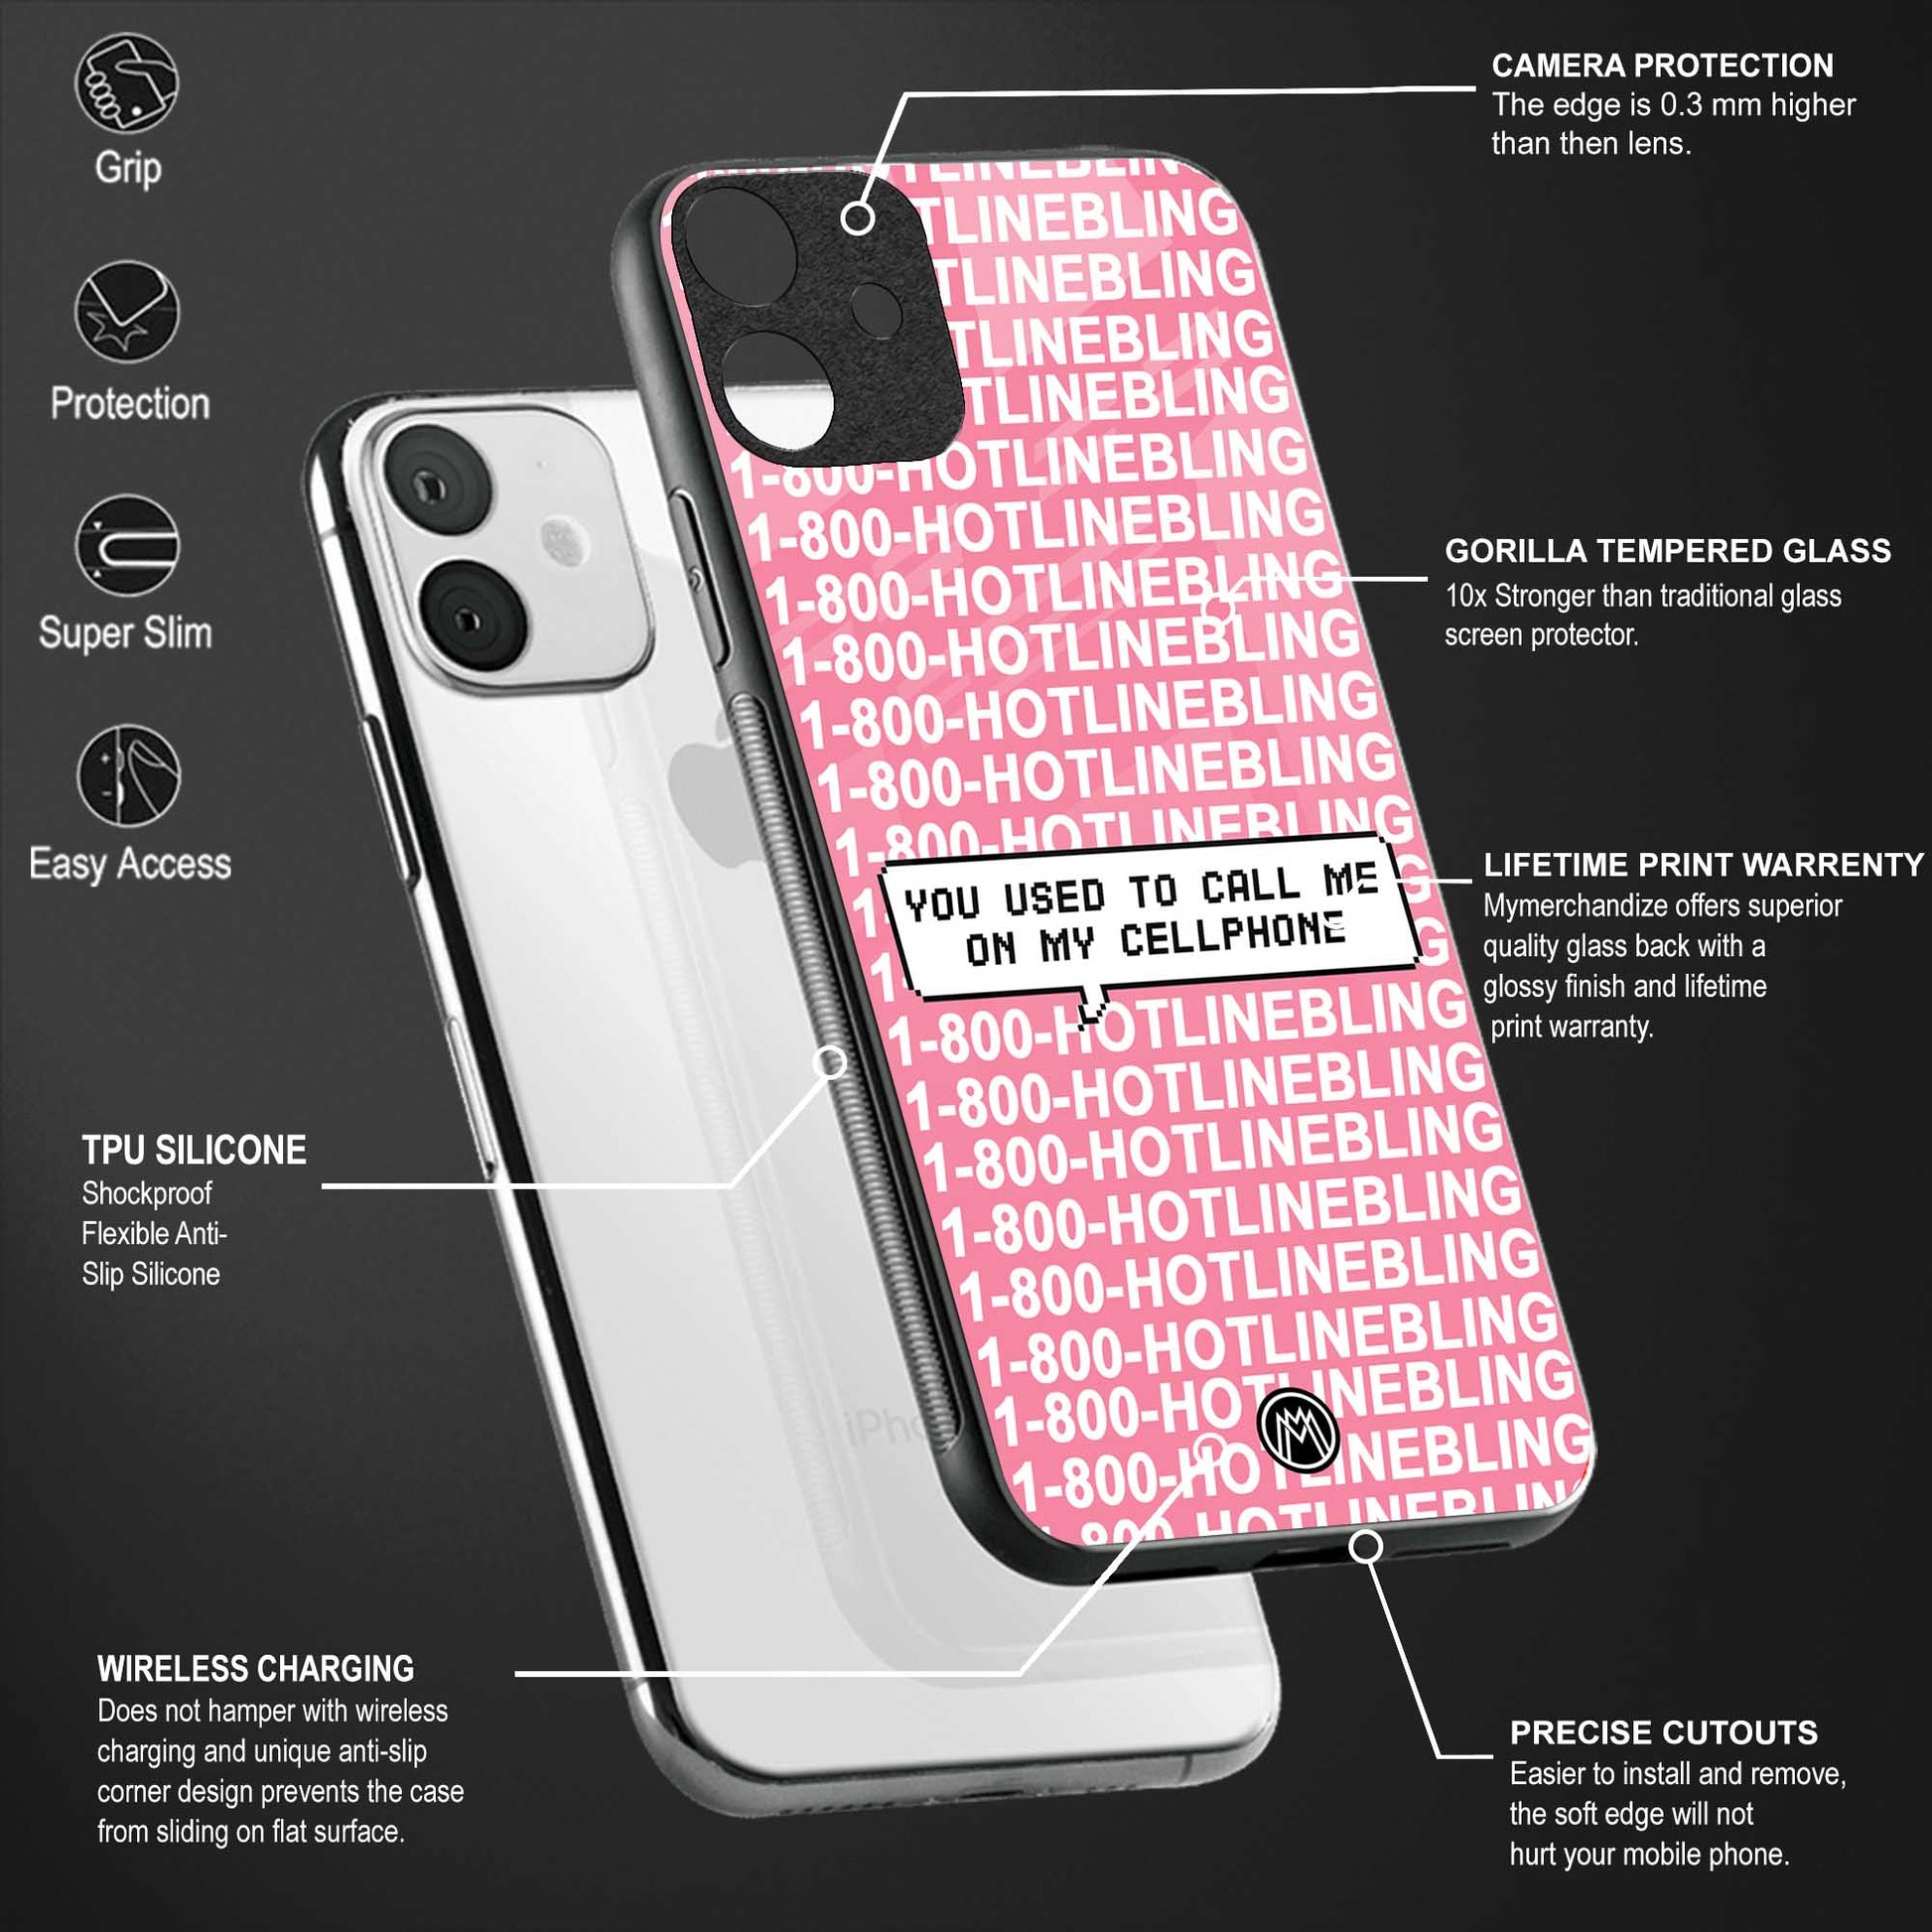 1800 hotline bling phone cover for samsung galaxy s20 